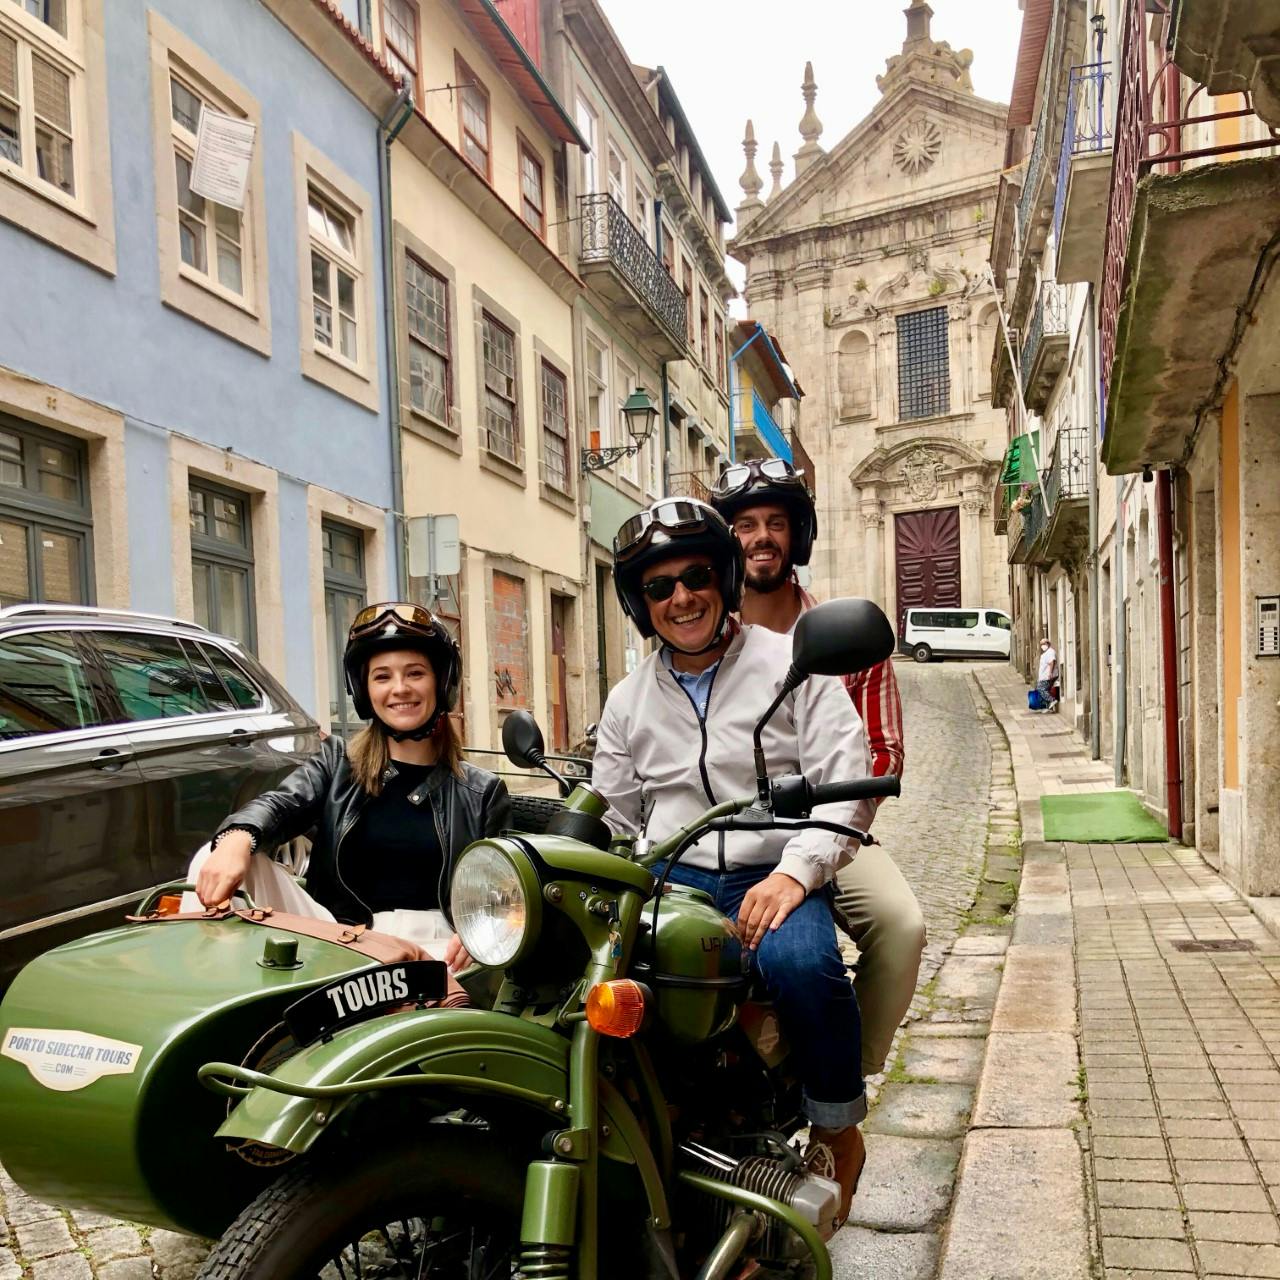 Full-day sidecar tour in Porto with wine tasting